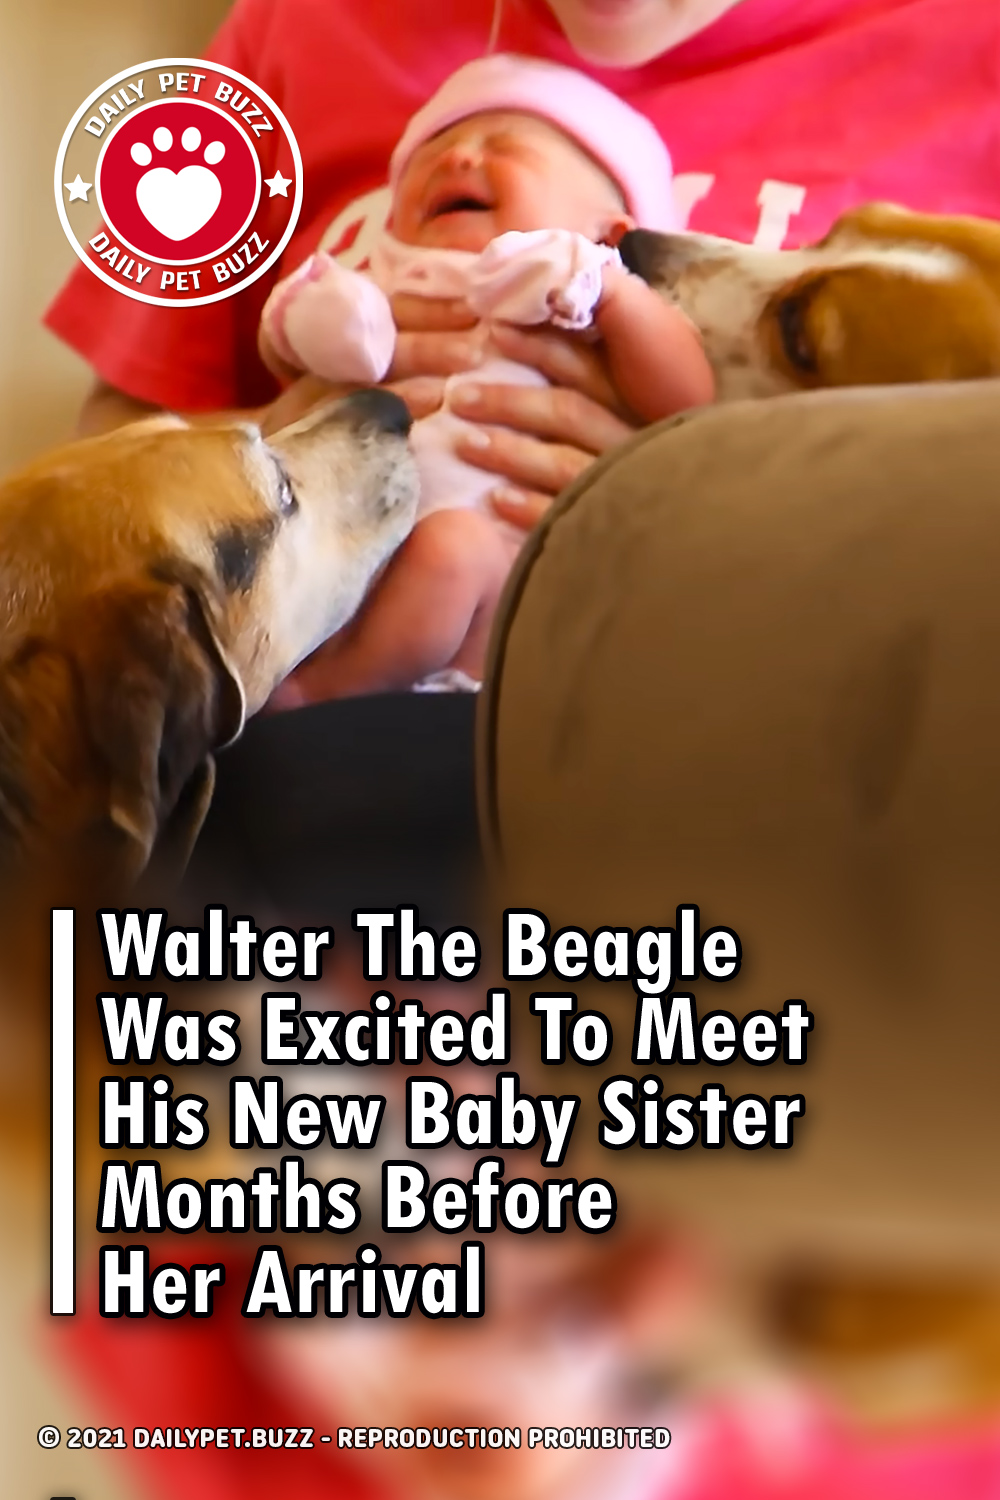 Walter The Beagle Was Excited To Meet His New Baby Sister Months Before Her Arrival